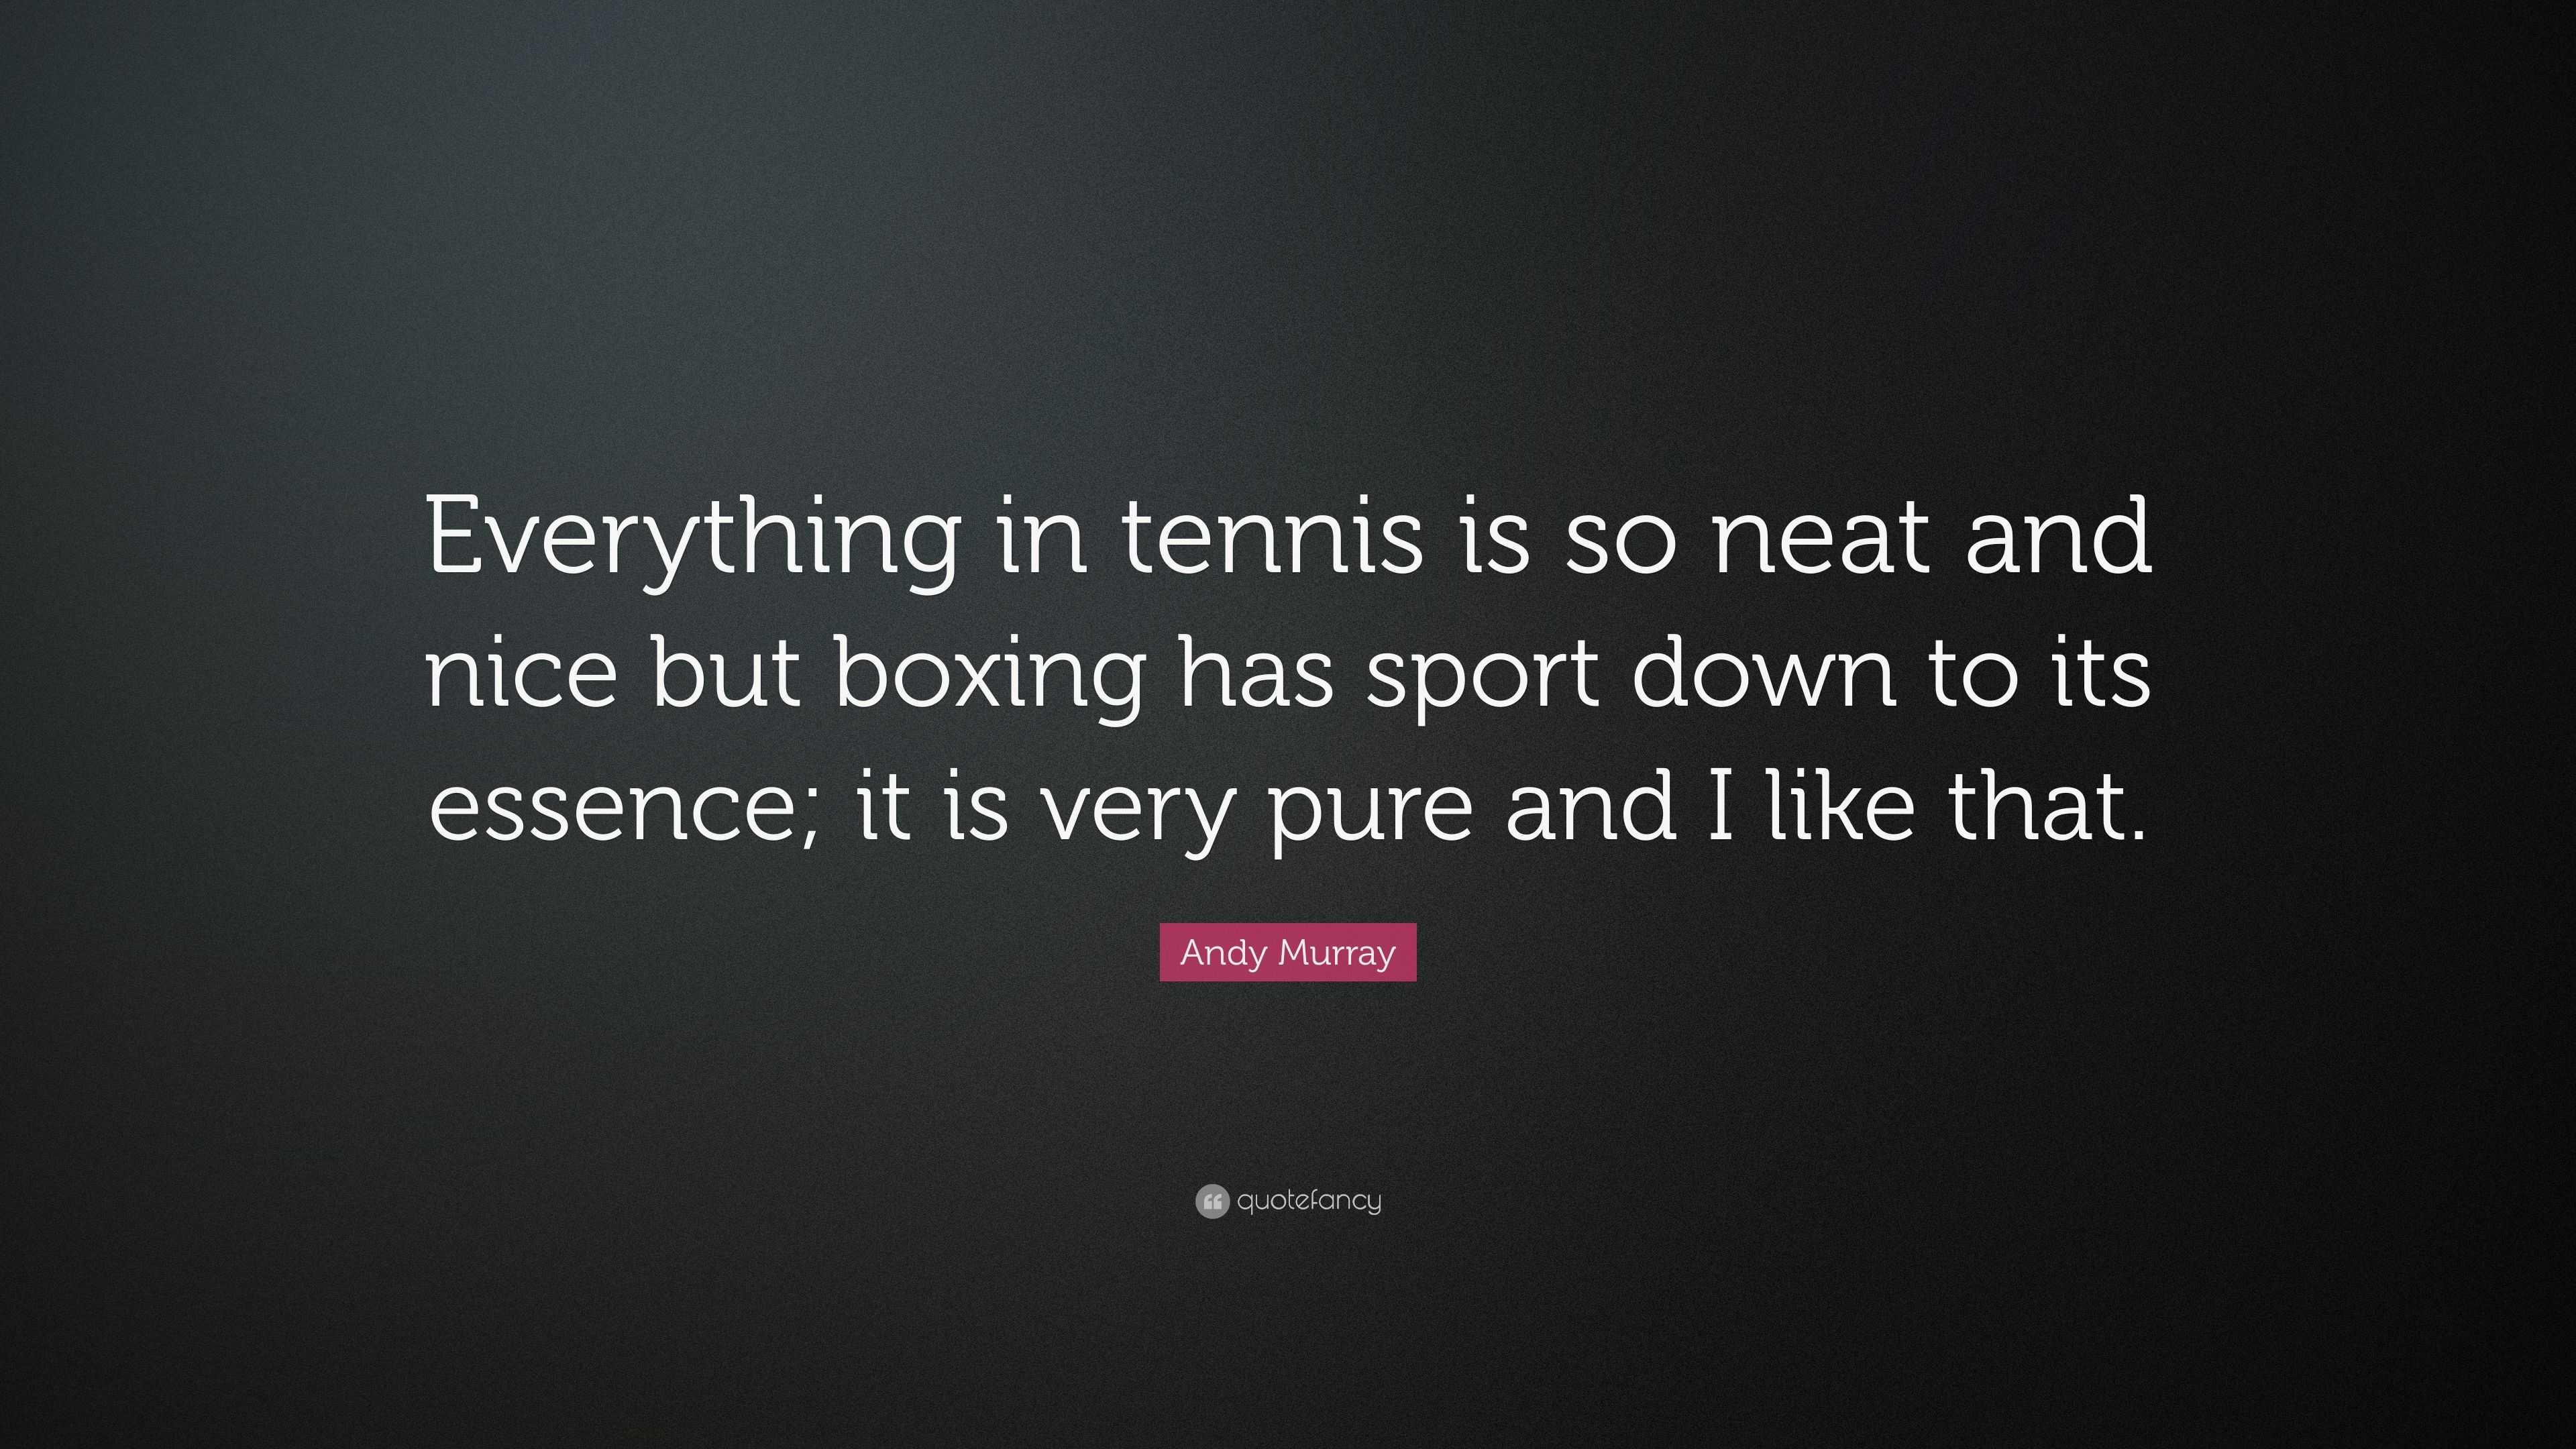 Andy Murray Quote: “Everything in tennis is so neat and nice but